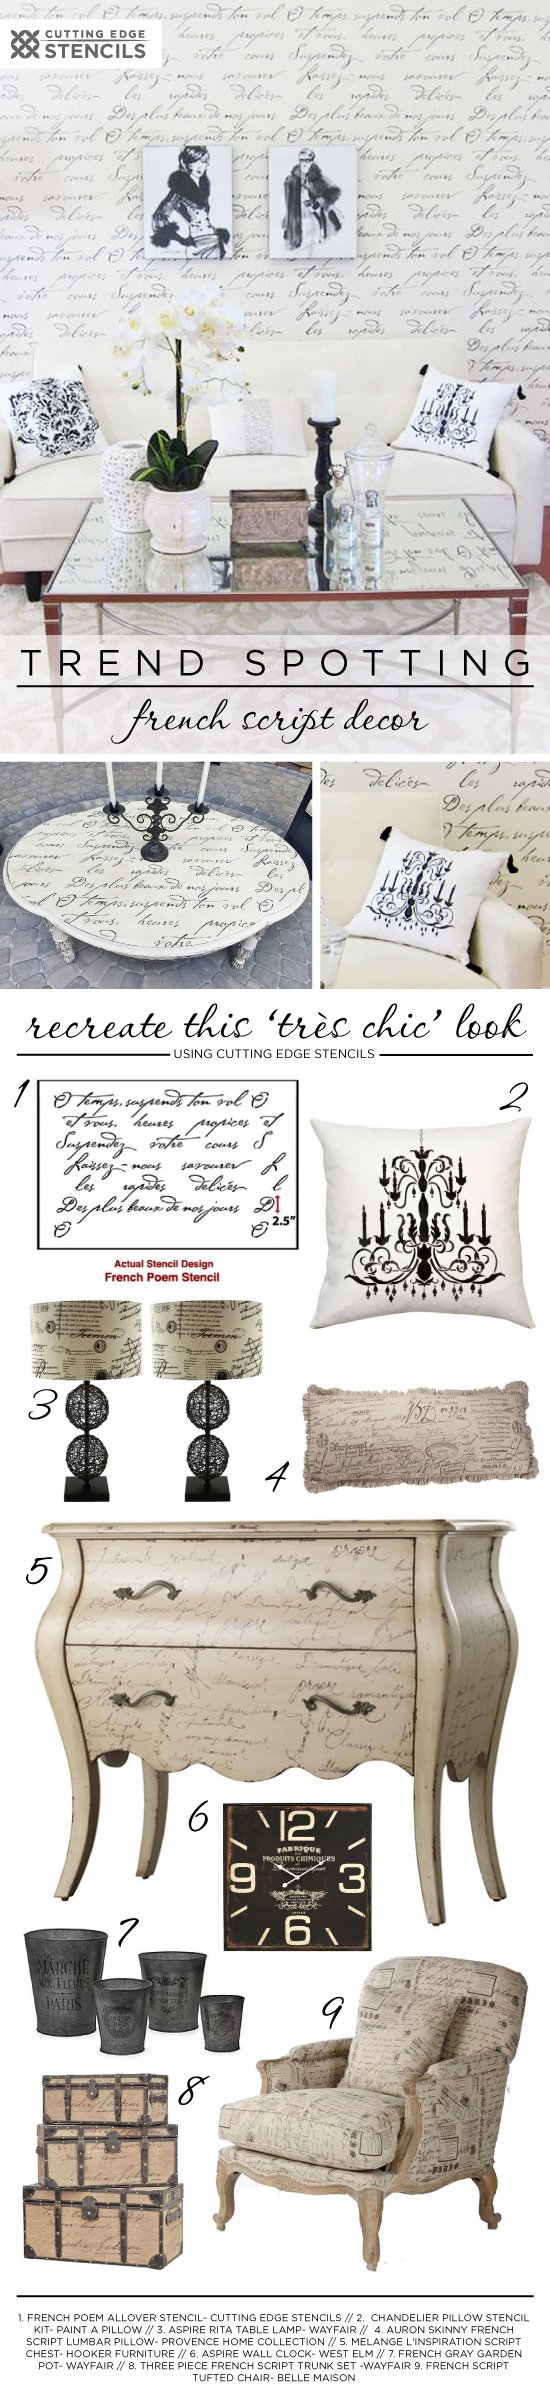 Recreate the French Typography home decor trend these DIY projects using the French Poem Stencil.  http://www.cuttingedgestencils.com/french-poem-typography-letter-stencil.html